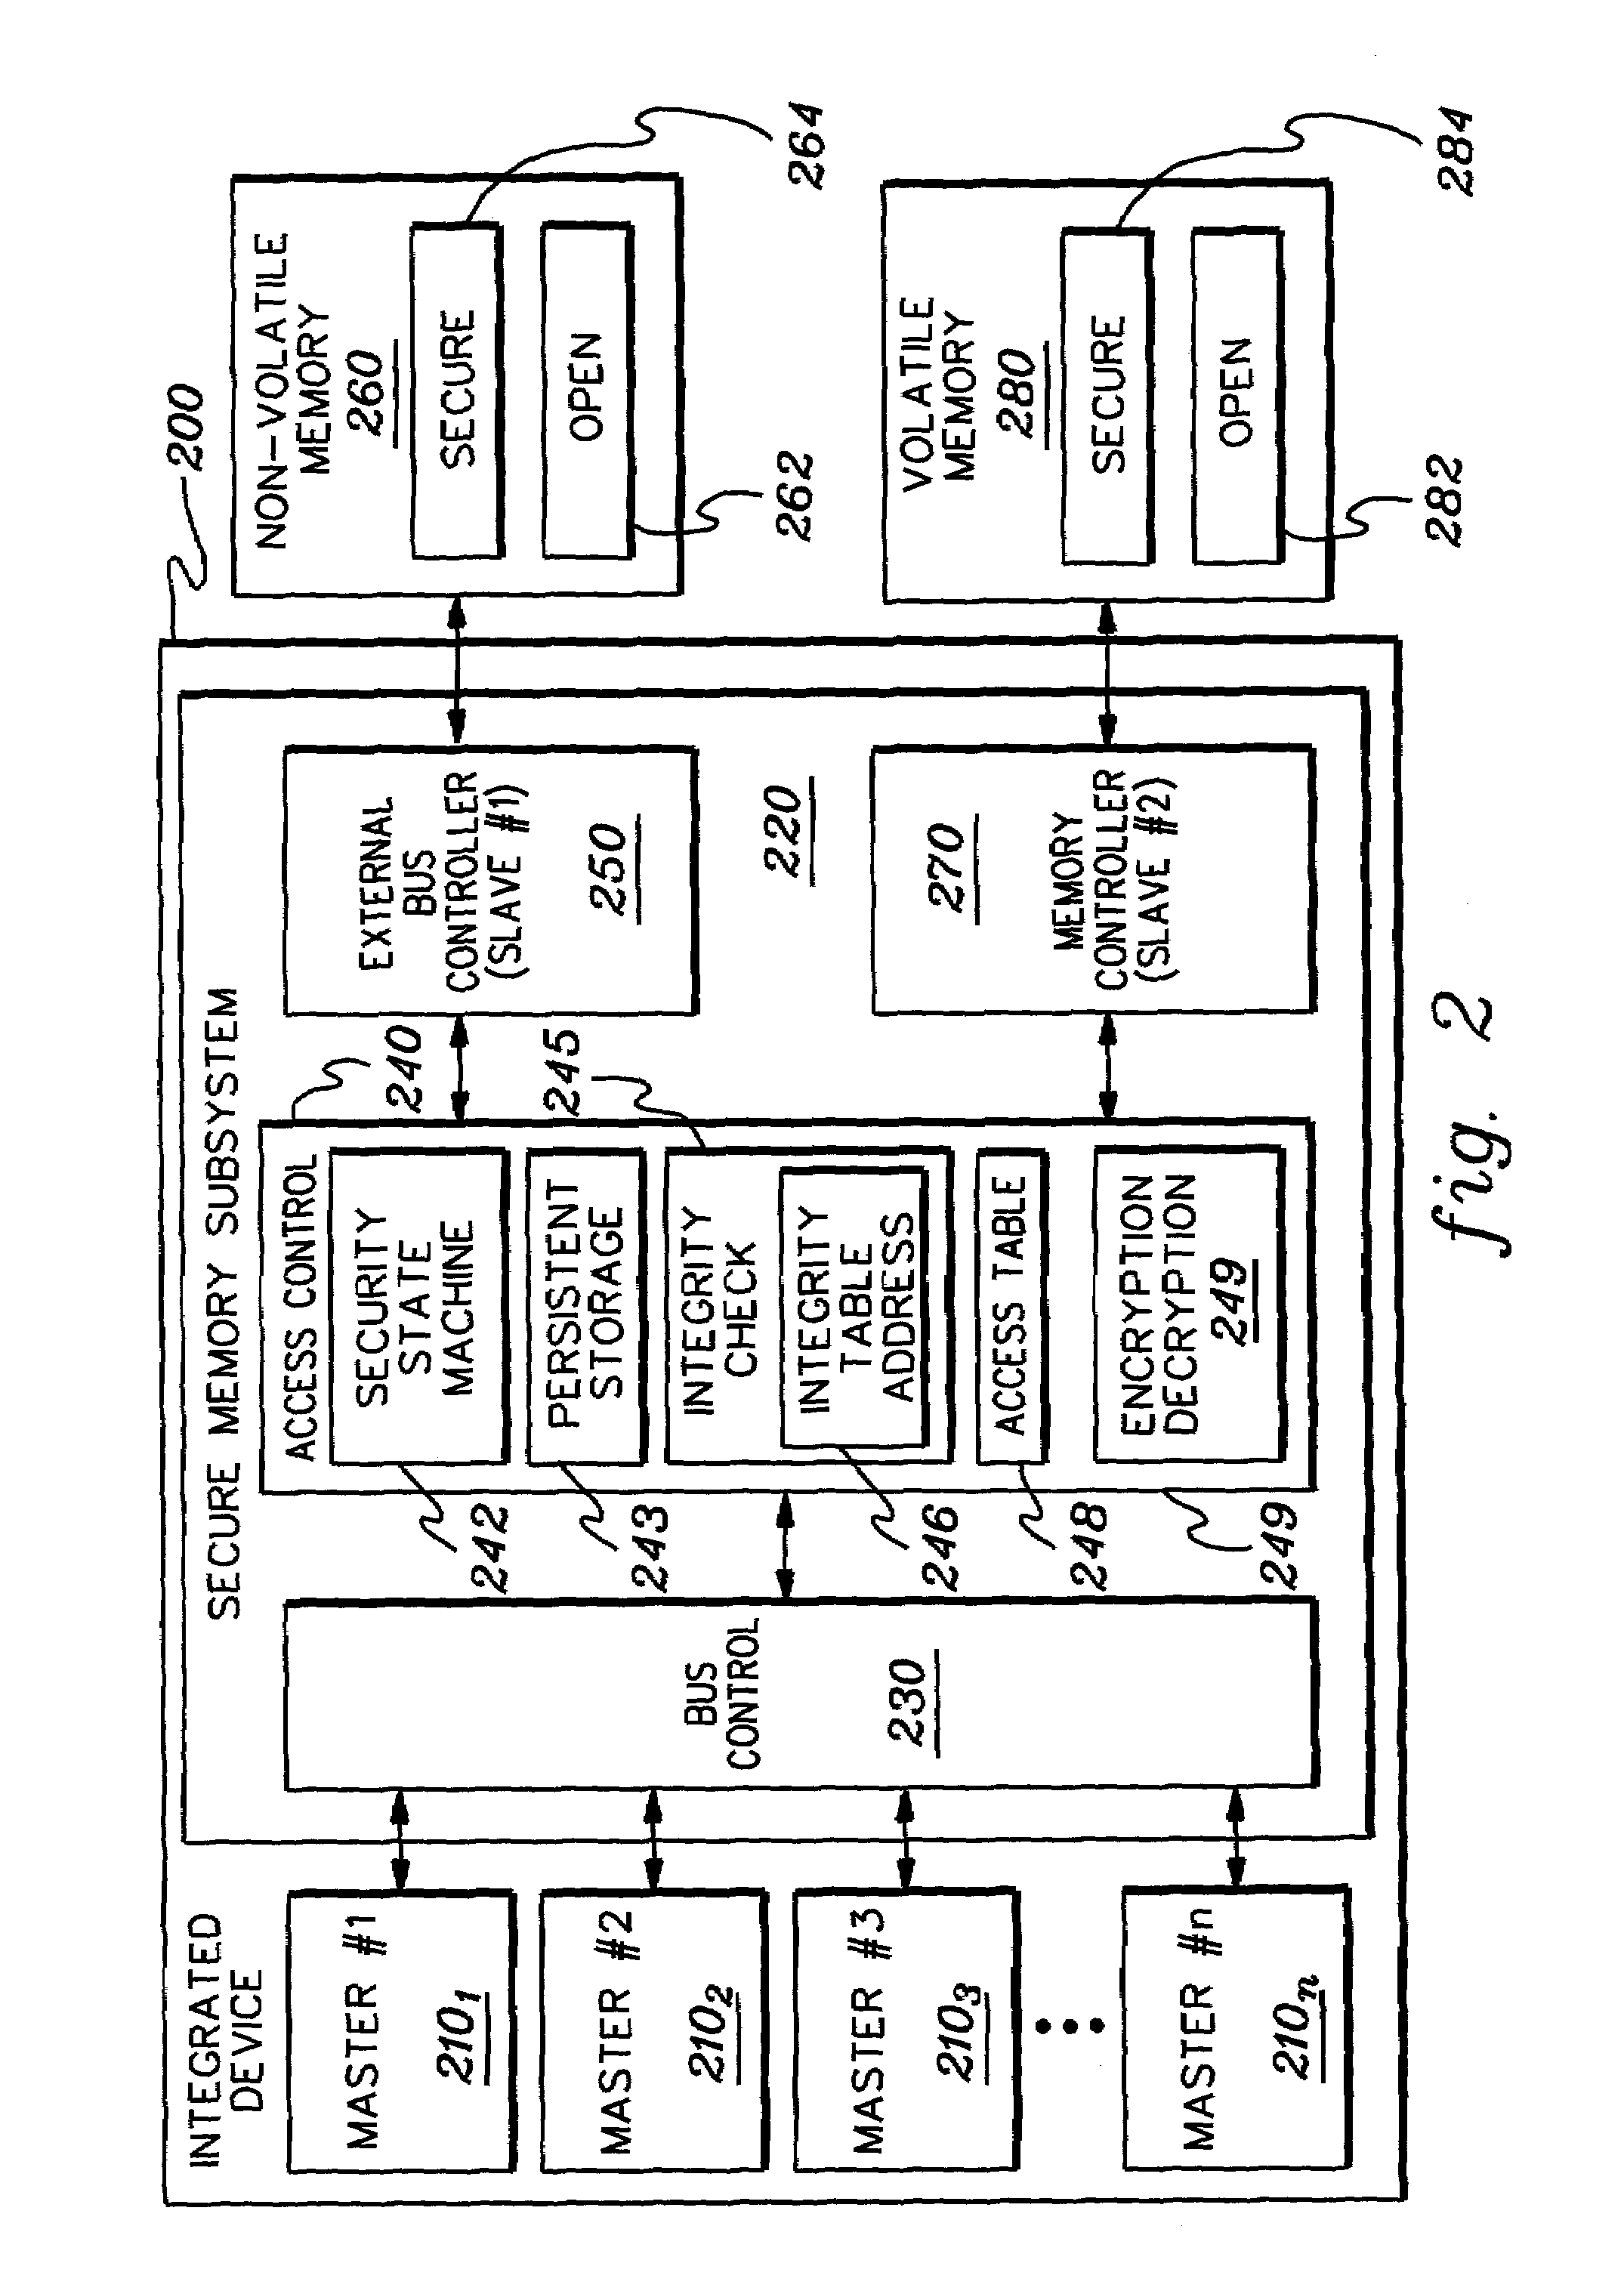 Control function implementing selective transparent data authentication within an integrated system